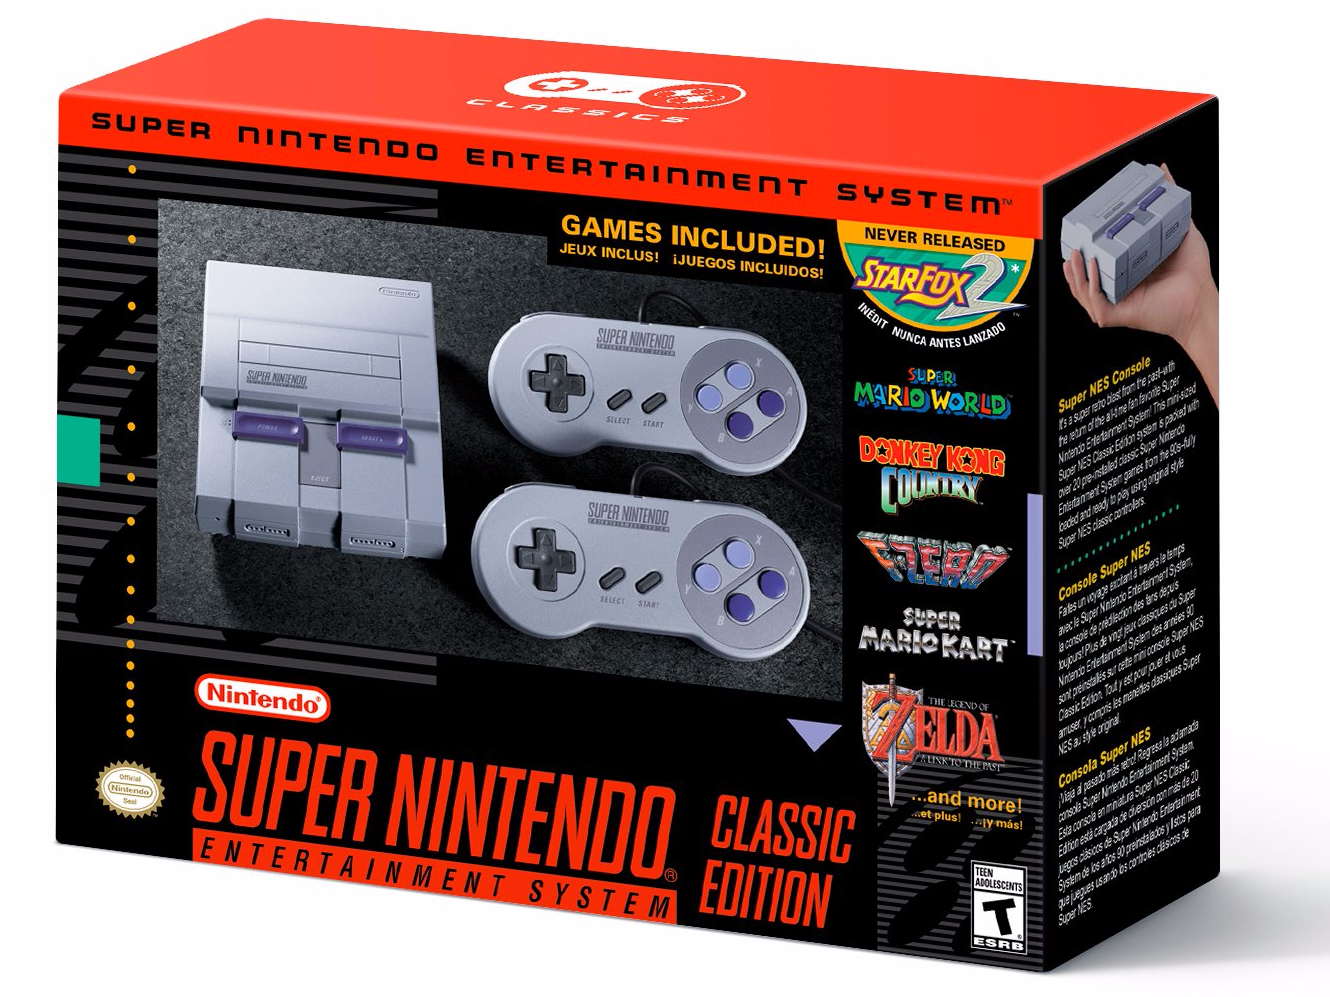 Super Nintendo Classic Edition – 20 Classic Games We Wish Had Made the Cut!